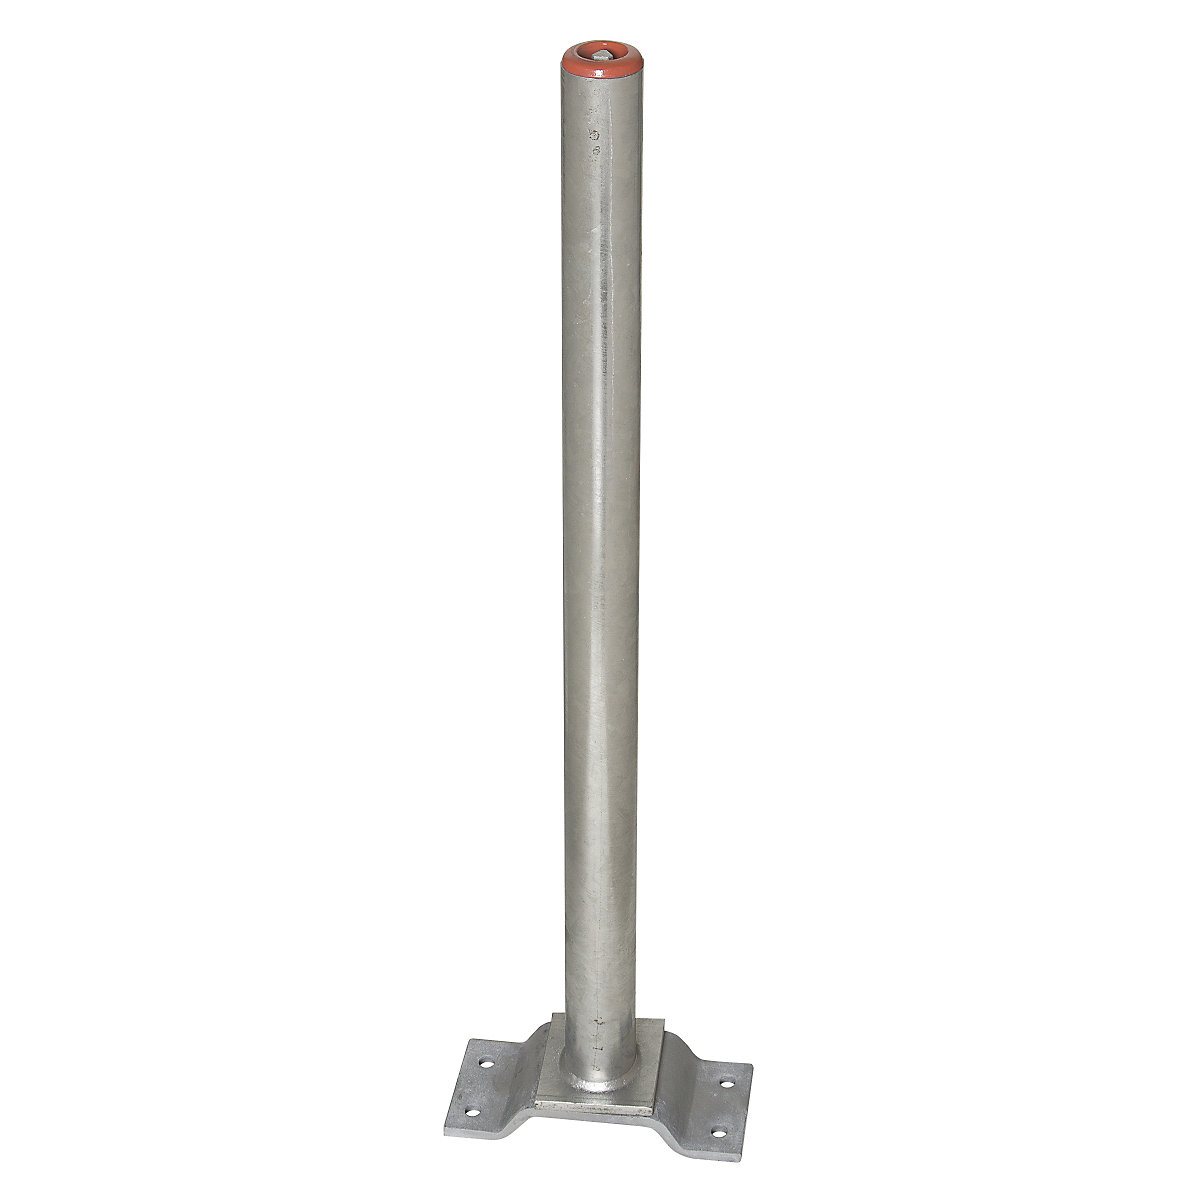 Barrier post made of steel